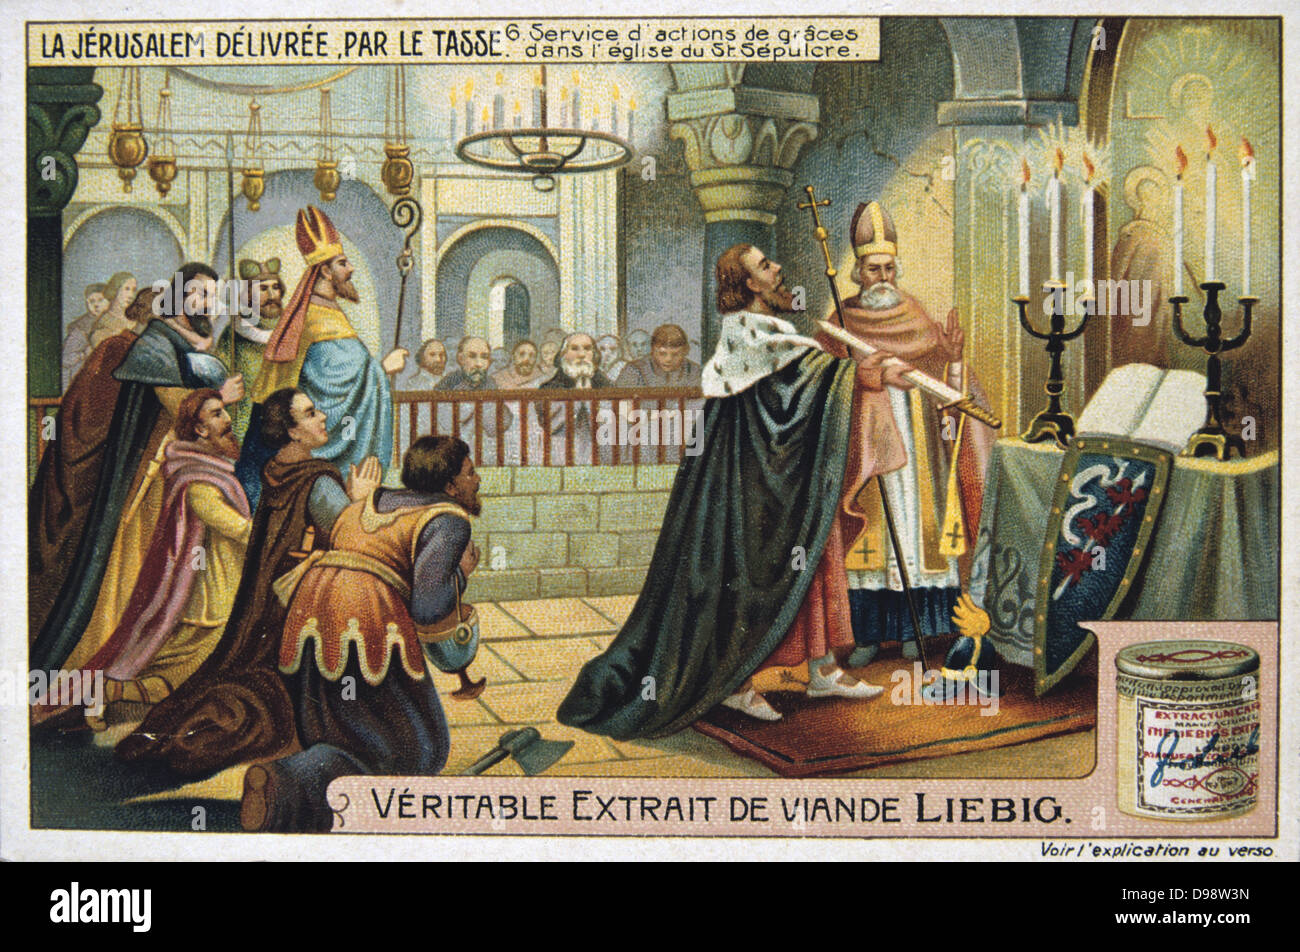 Jerusalem Delivered' (1580) epic poem by Torquato Tasso, Italian poet. Fictionalised story of First Crusade 1095-1099. Crusaders' service of thanksgiving in St Sepulchre, Jerusalem. Liebig Trade Card c1900. Chromolithograph. Stock Photo